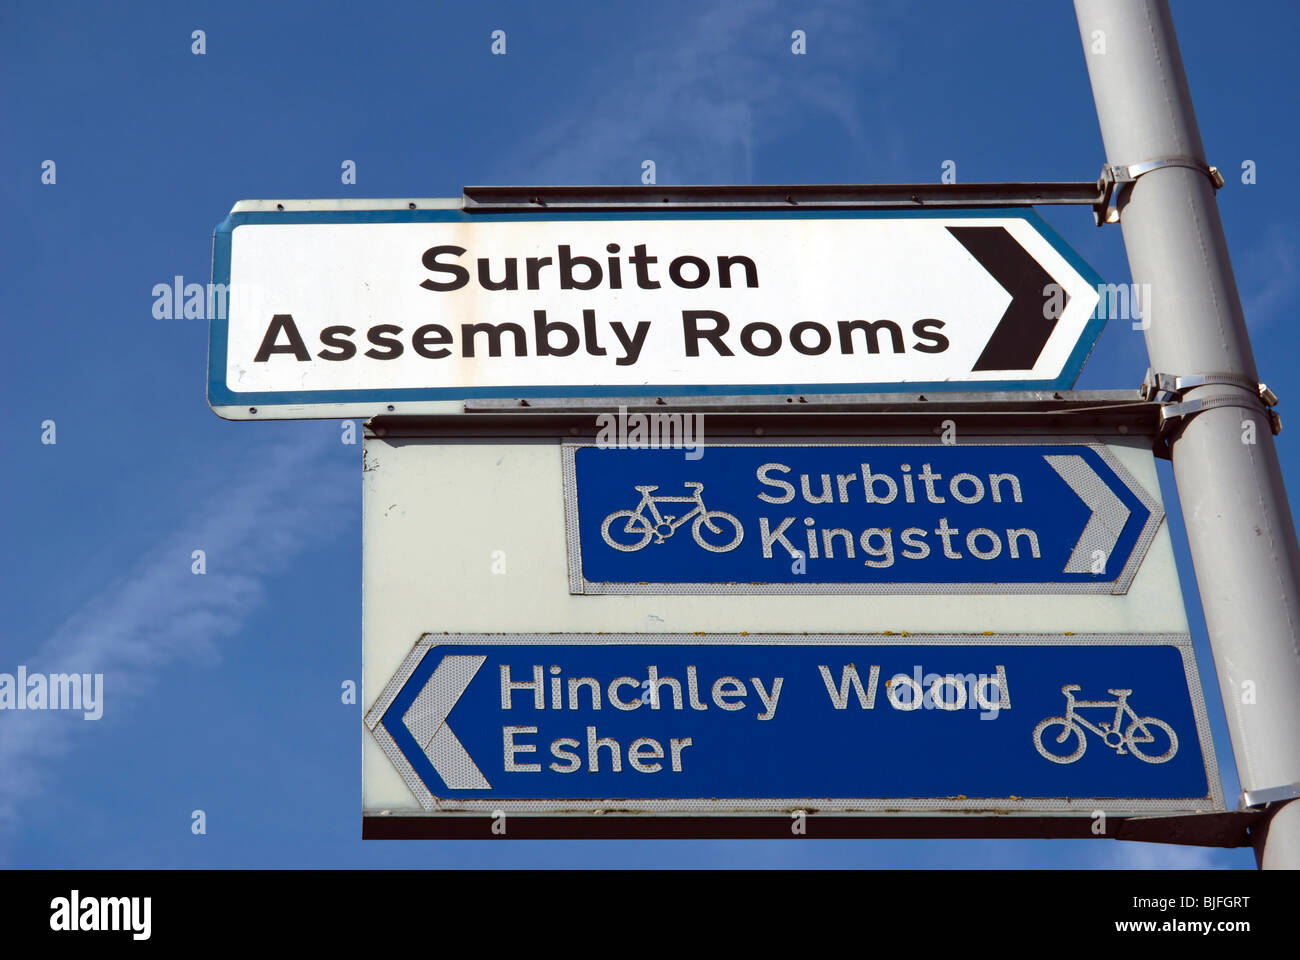 signs giving directions to surbiton assembly rooms, hinchley wood,  esher and kingston, in surbition, surrey, england Stock Photo